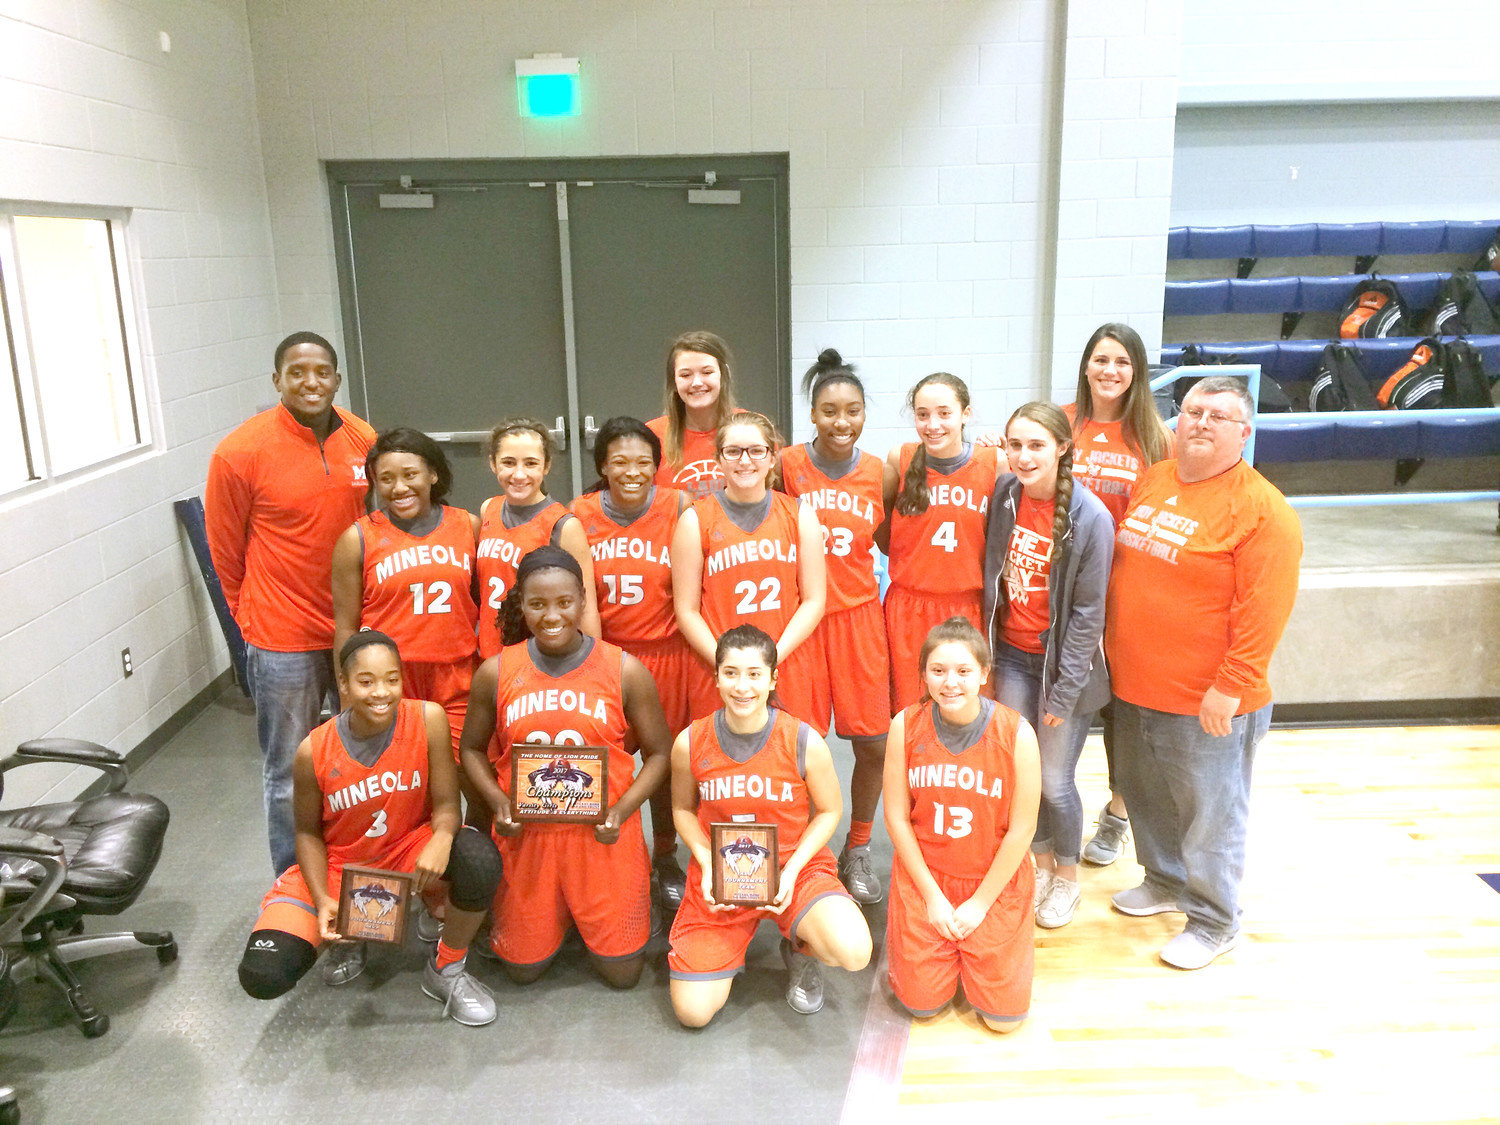 The Mineola Lady Jackets after winning the Union Grove Girls Varsity Tournament.